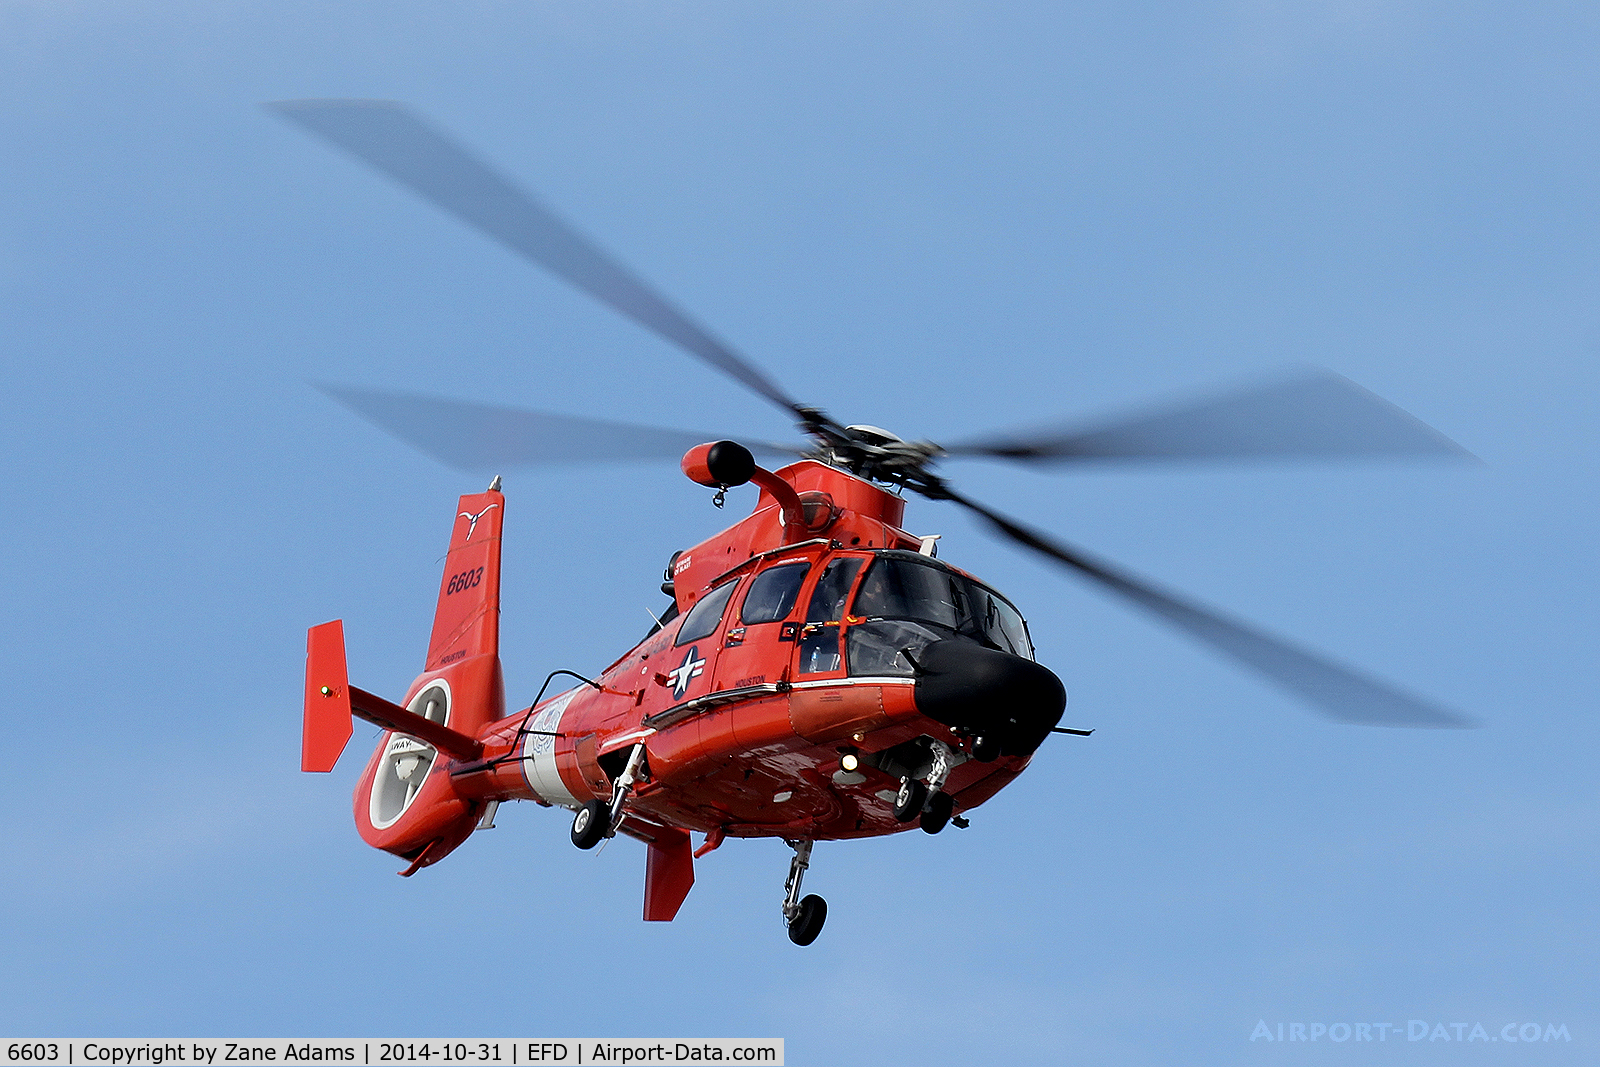 6603, Aerospatiale MH-65C Dolphin C/N 6324, At the 2014 Wings Over Houston Airshow